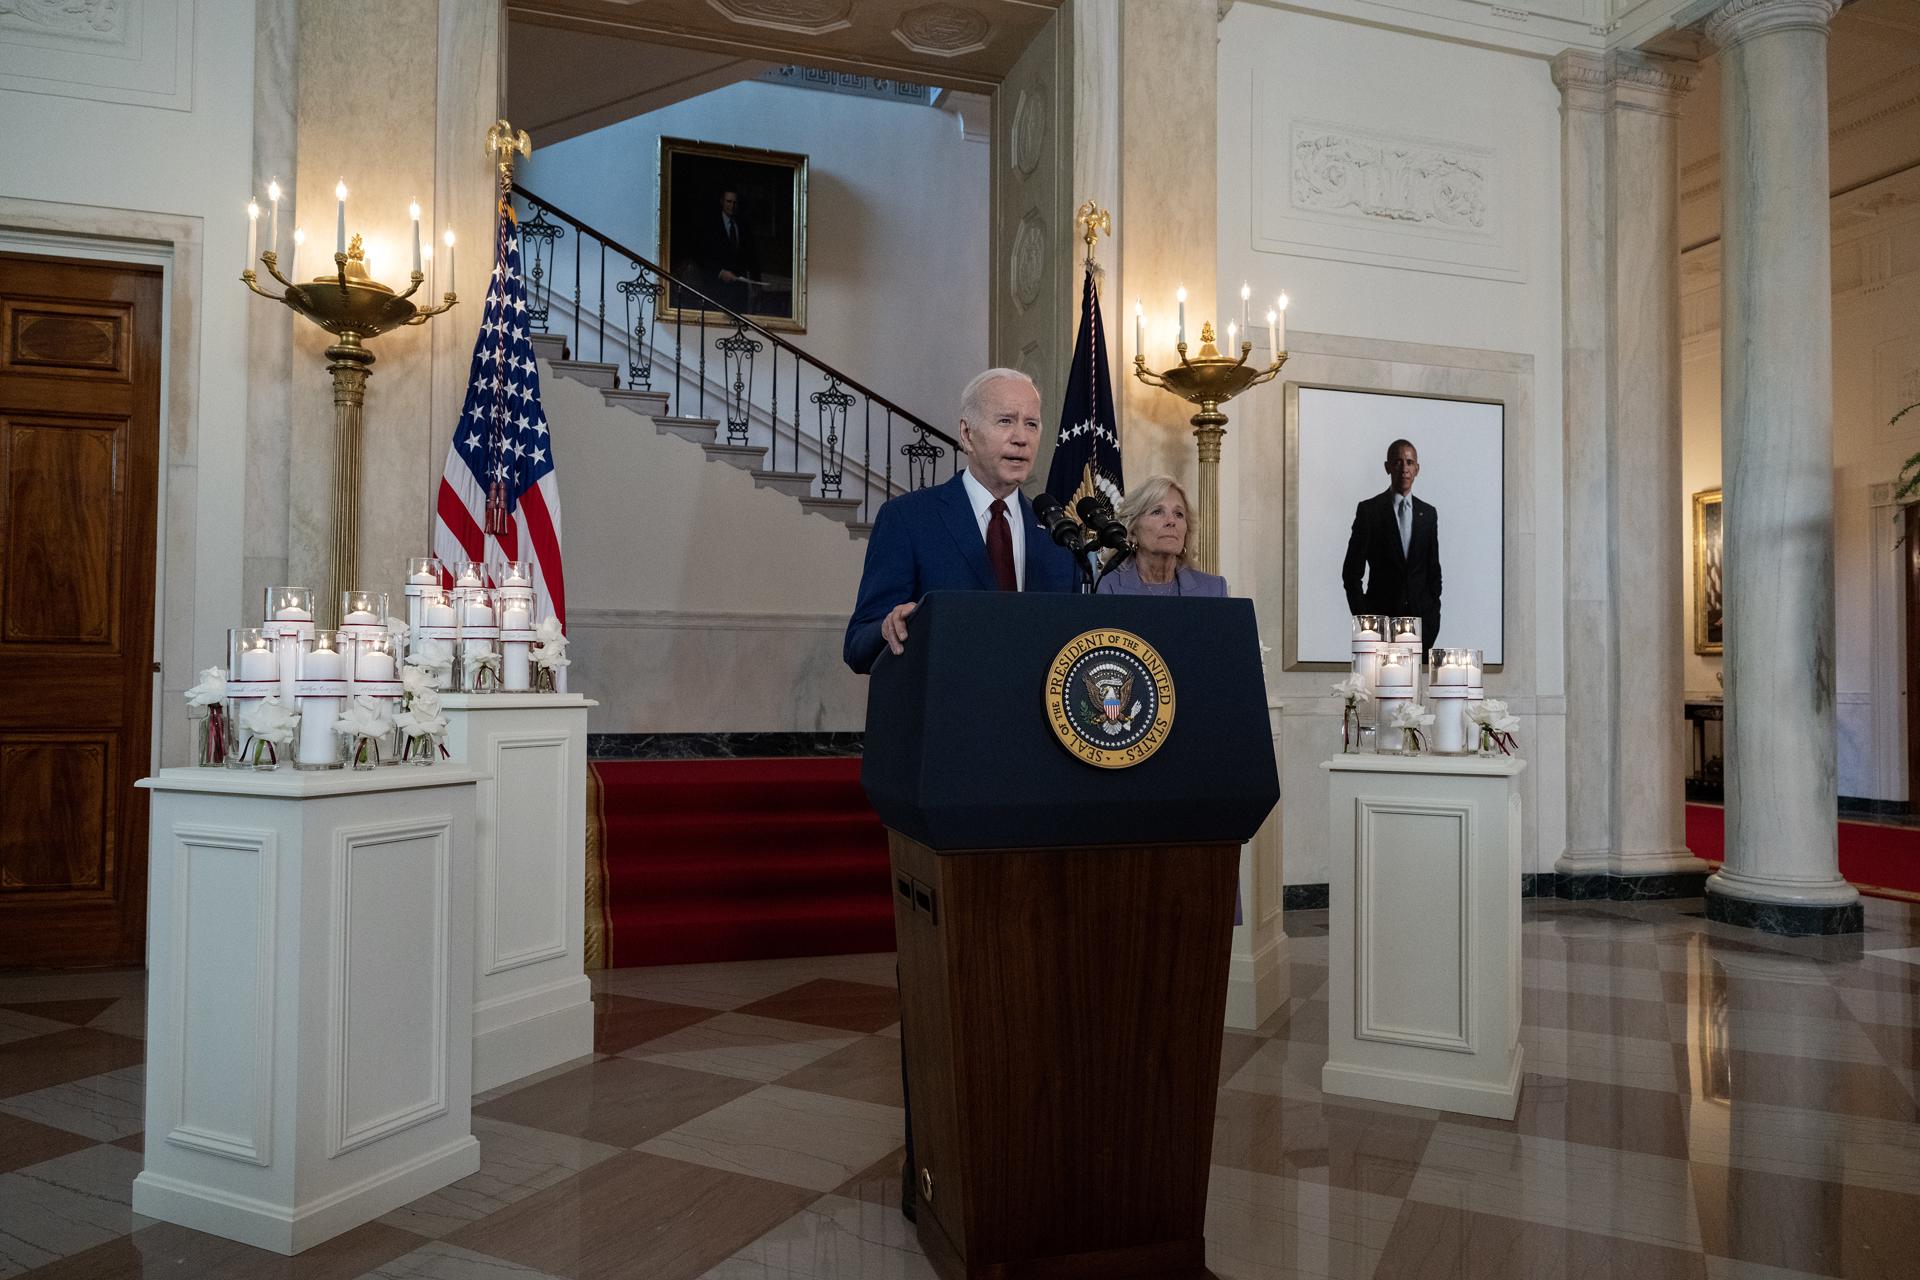 United States President Joe Biden, accompanied by First Lady Jill Biden, speaks during a tribute to the victims of the Uvalde school shooting, at the White House, in Washington (USA), on May 24, 2023. BLAZETRENDS/EPA/Ron Sachs/Pool